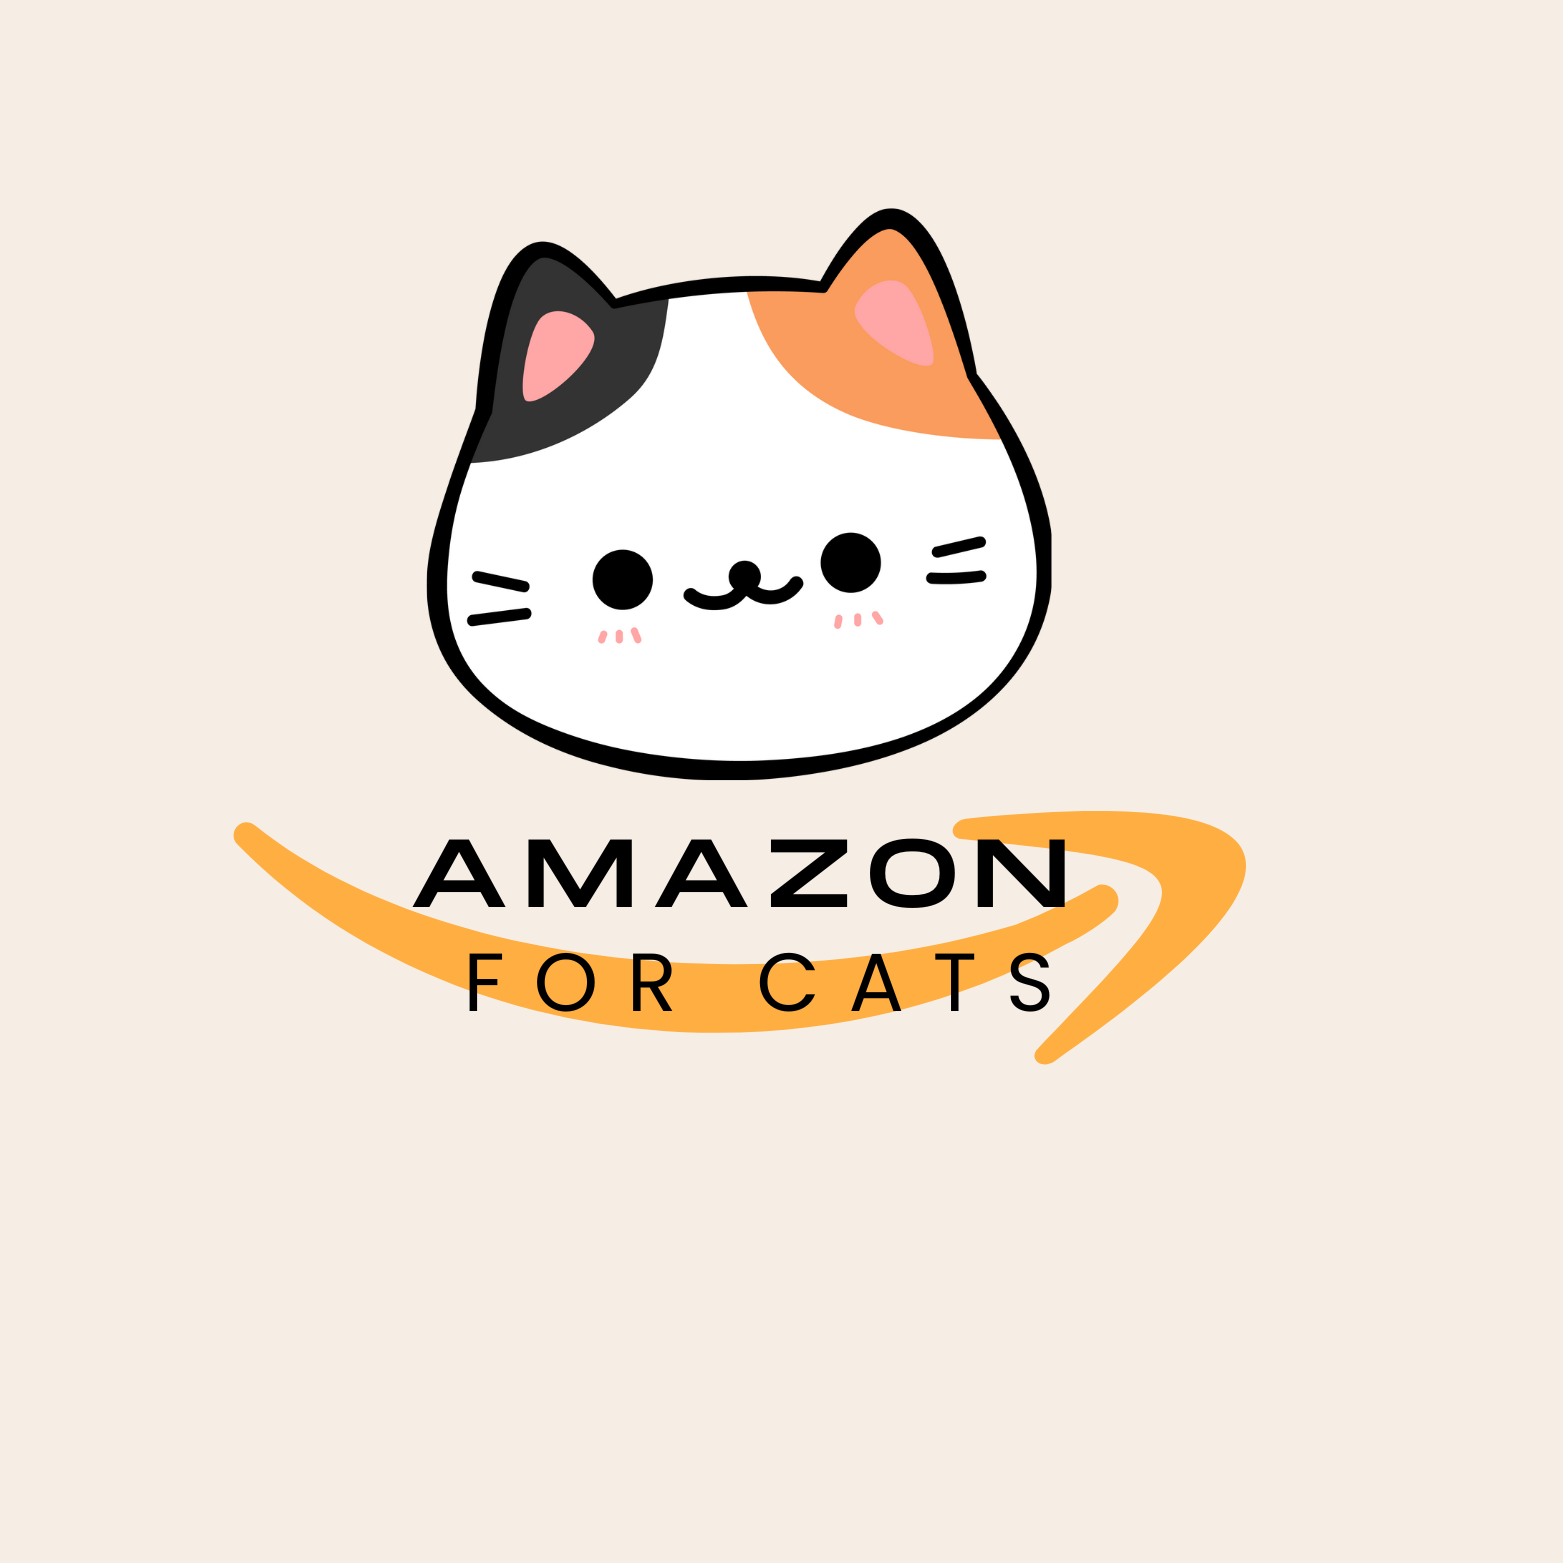 Amazon for cats